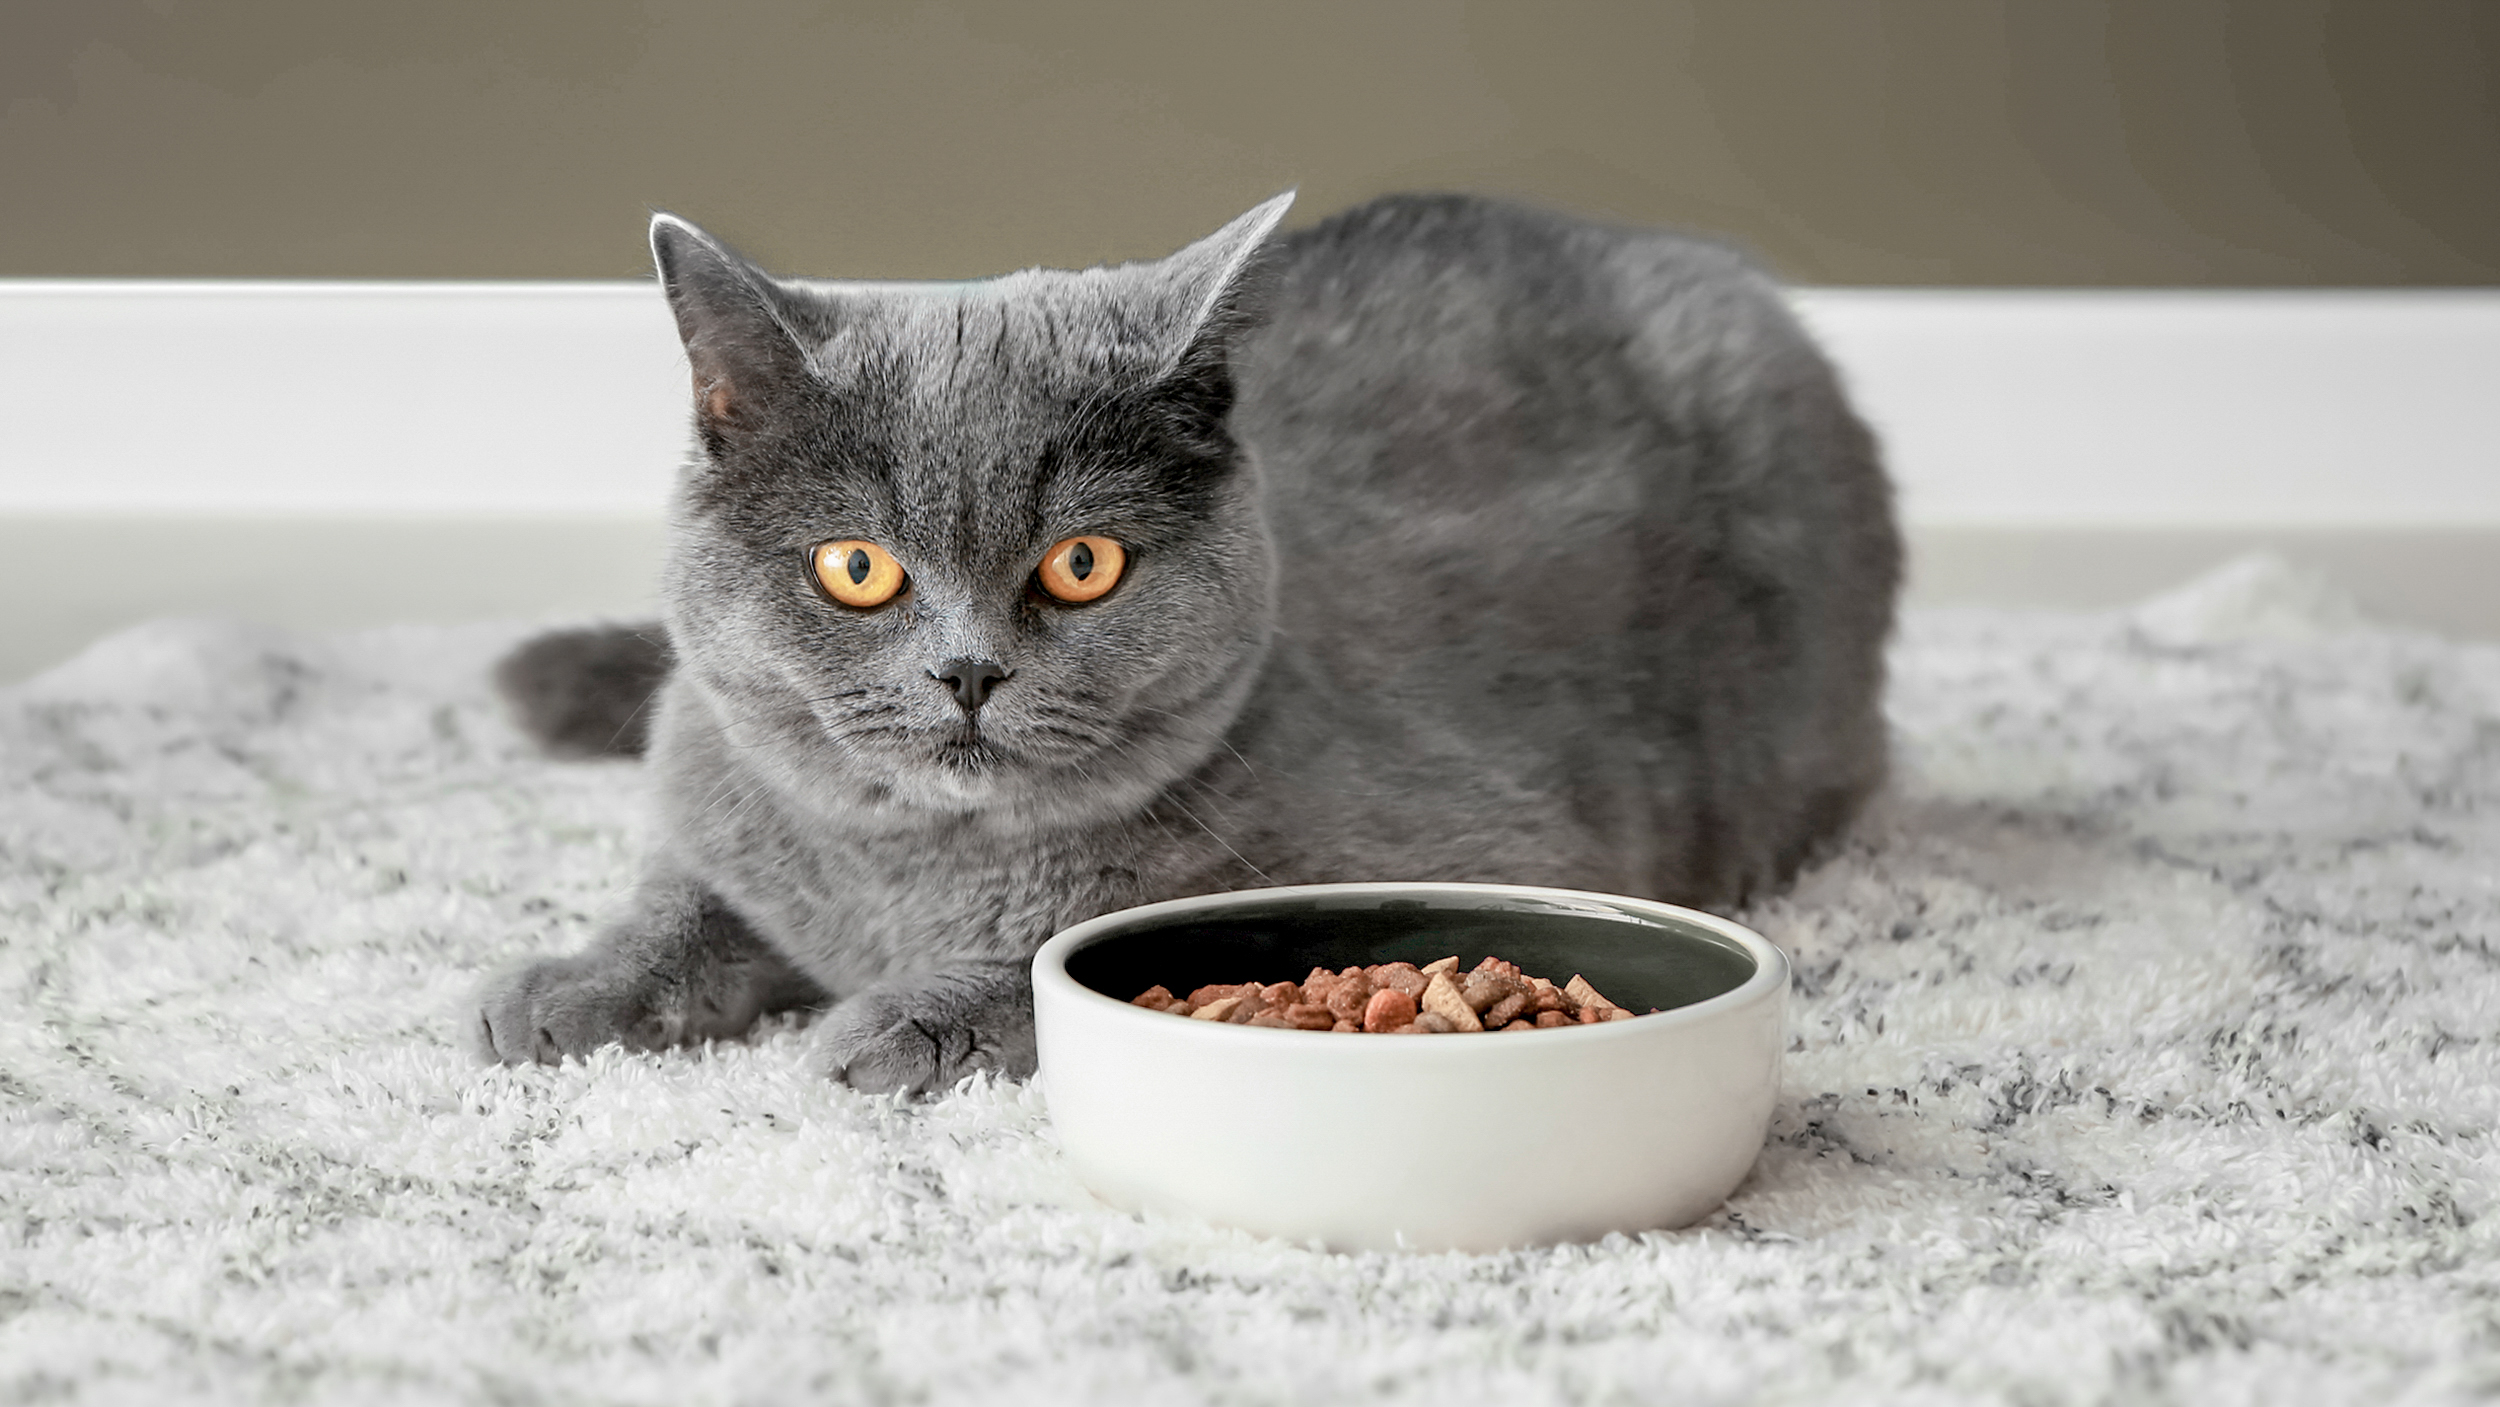 Adult British Shorthair lying down indoors on a white rug next to a food bowl.